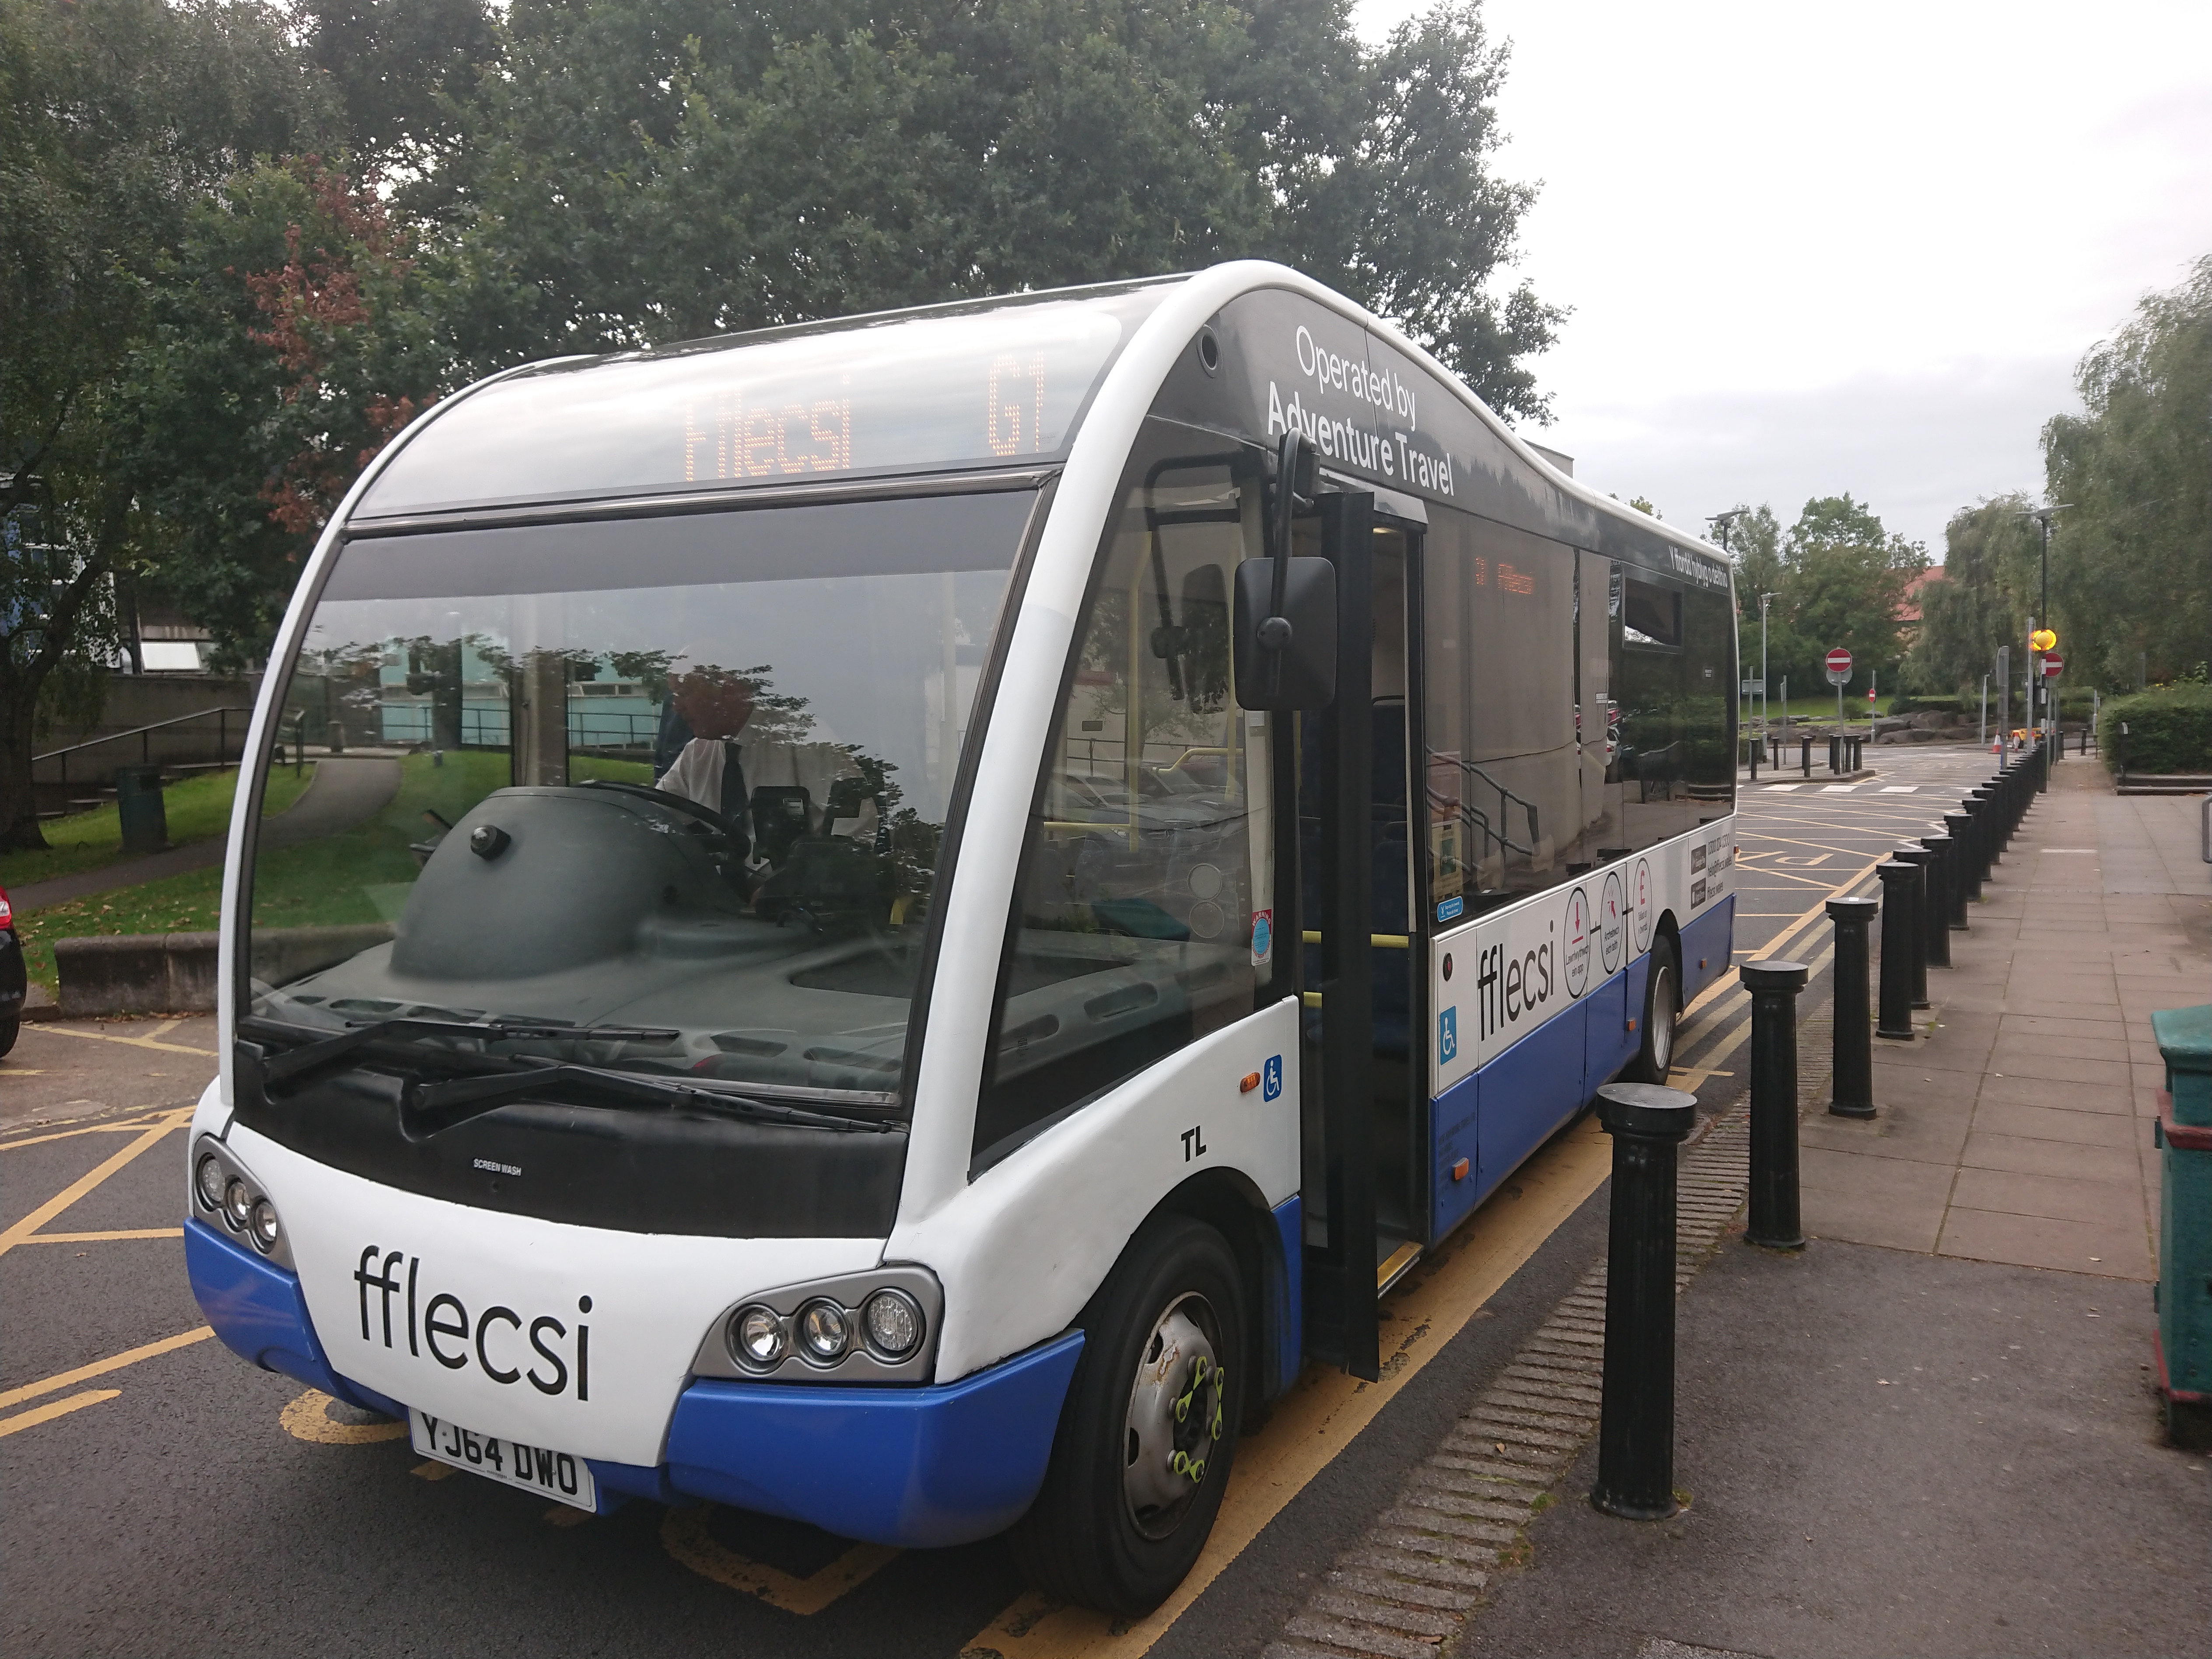 Cardiff’s first DRT reaches trial milestone